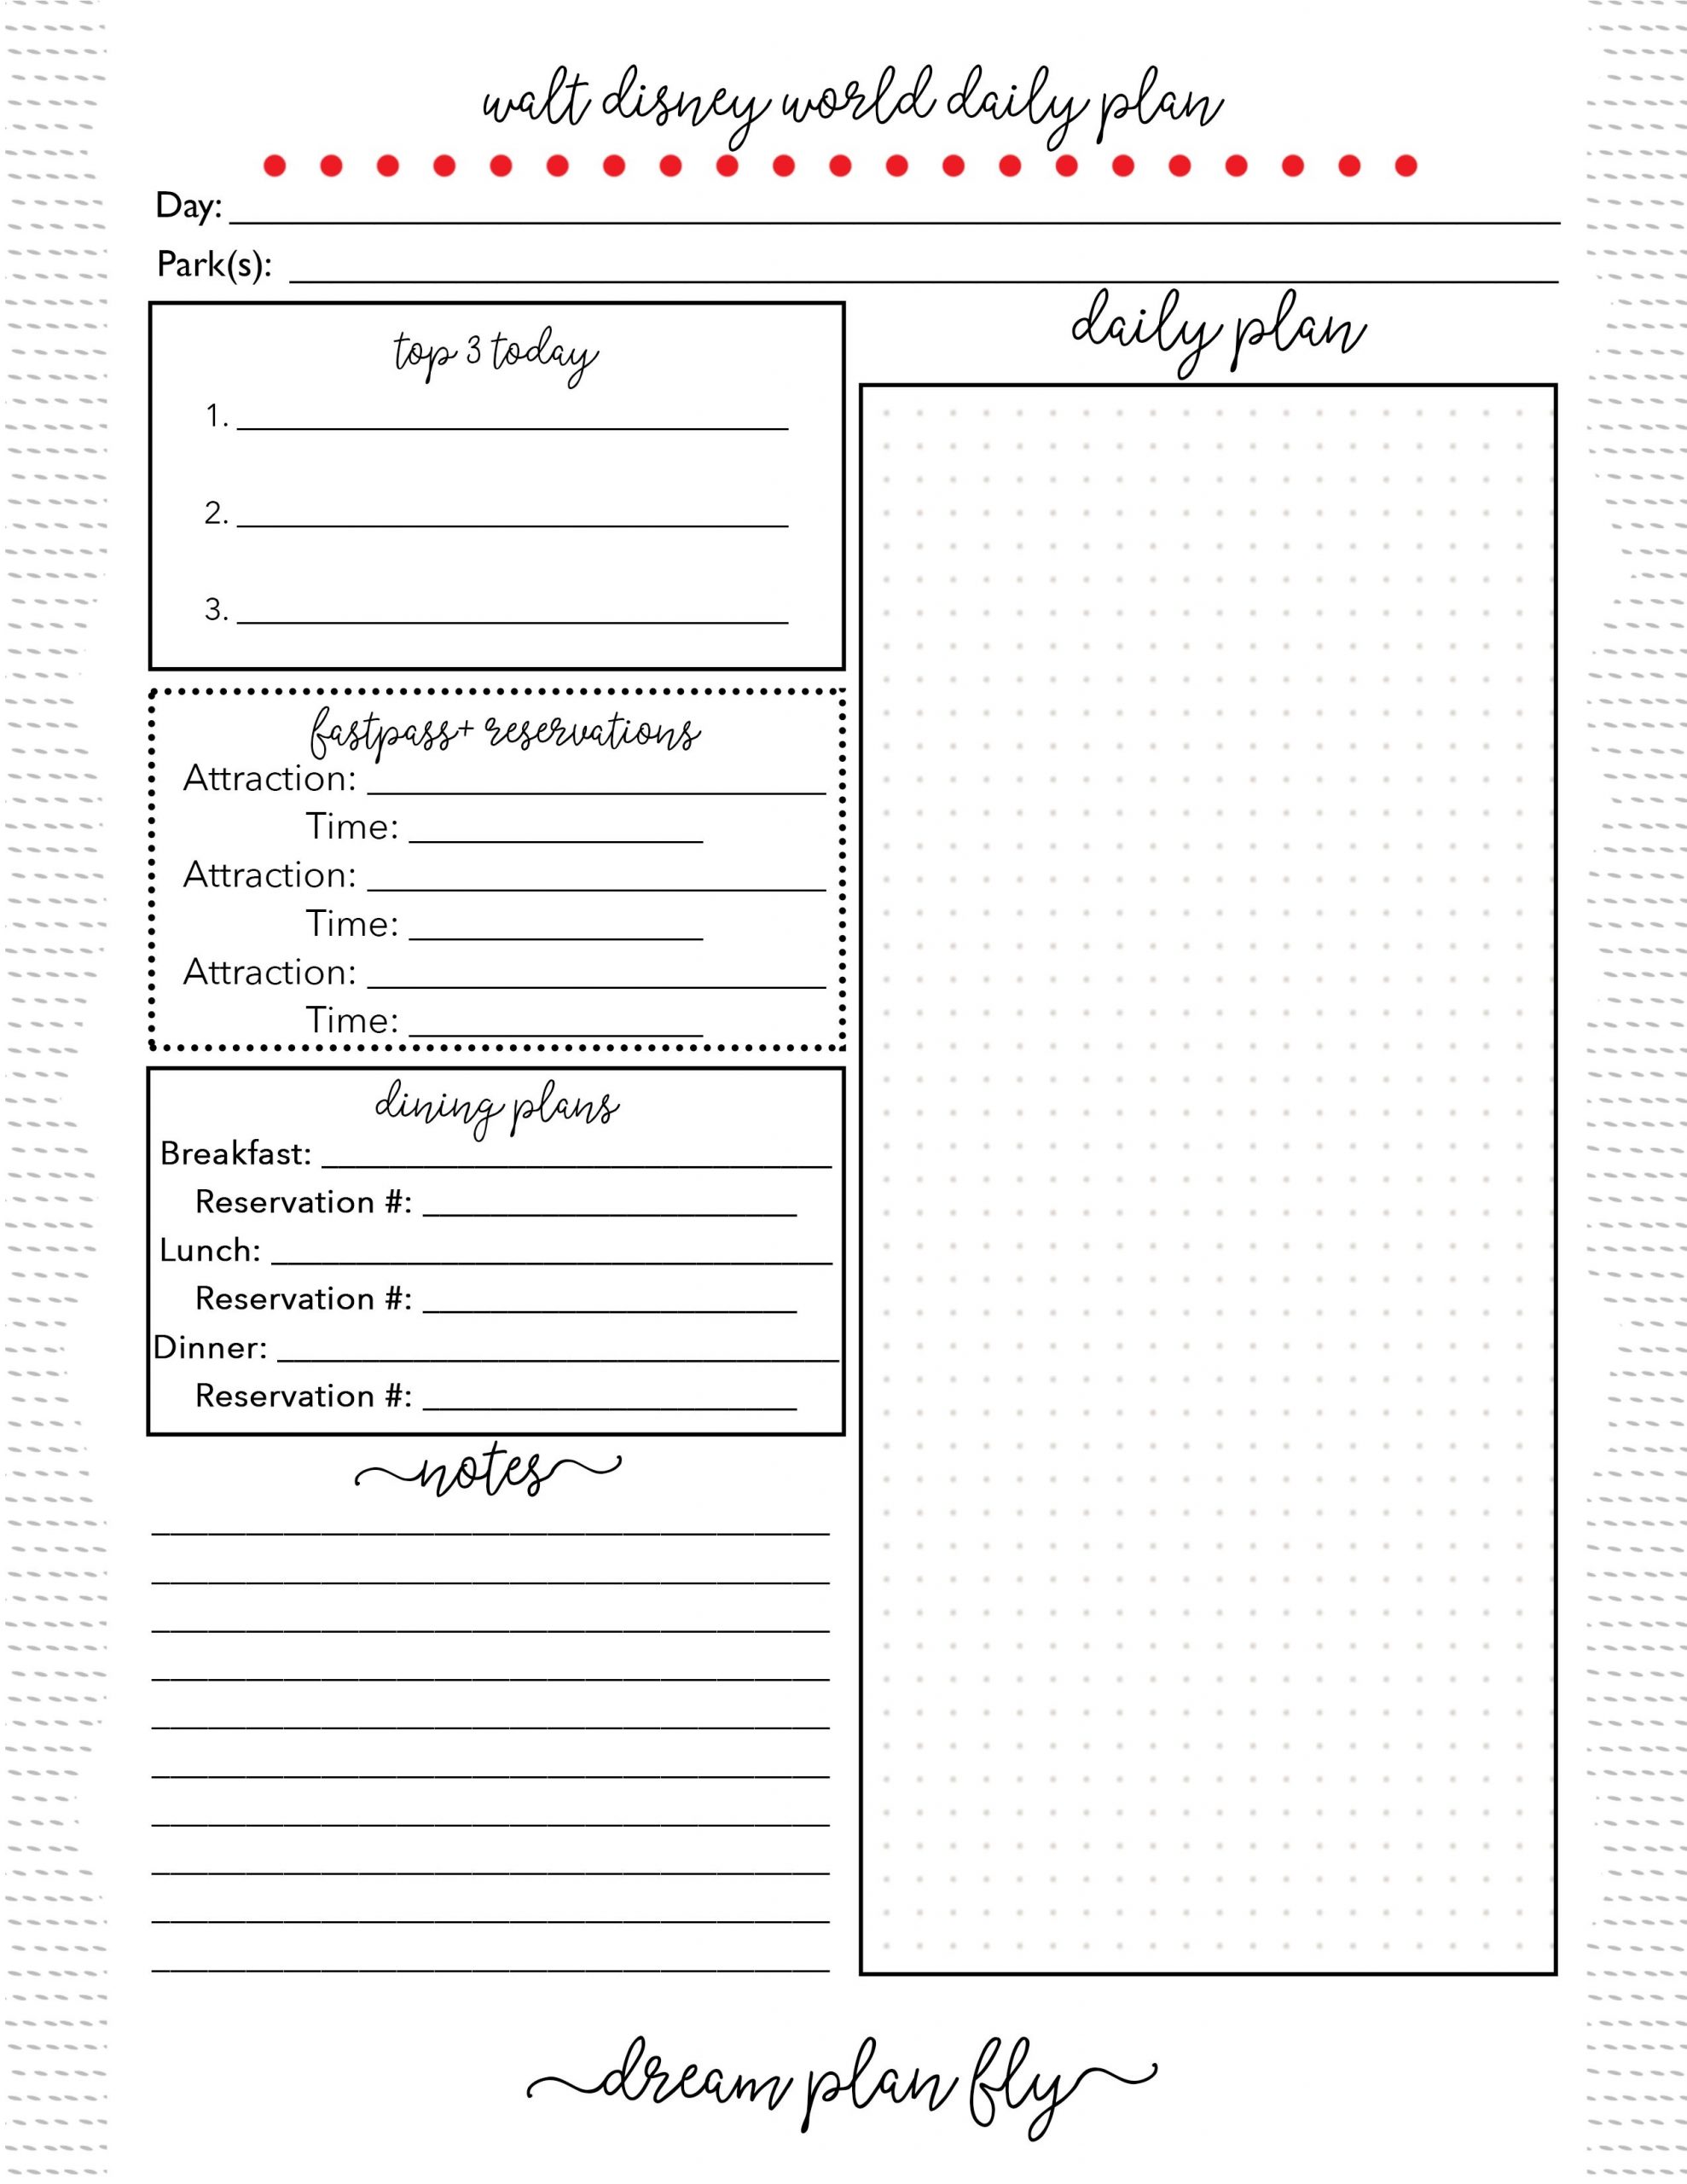 Free Printable Daily Planner For Walt Disney World - Dream  Printable Disney World Weekly Planning Sheets